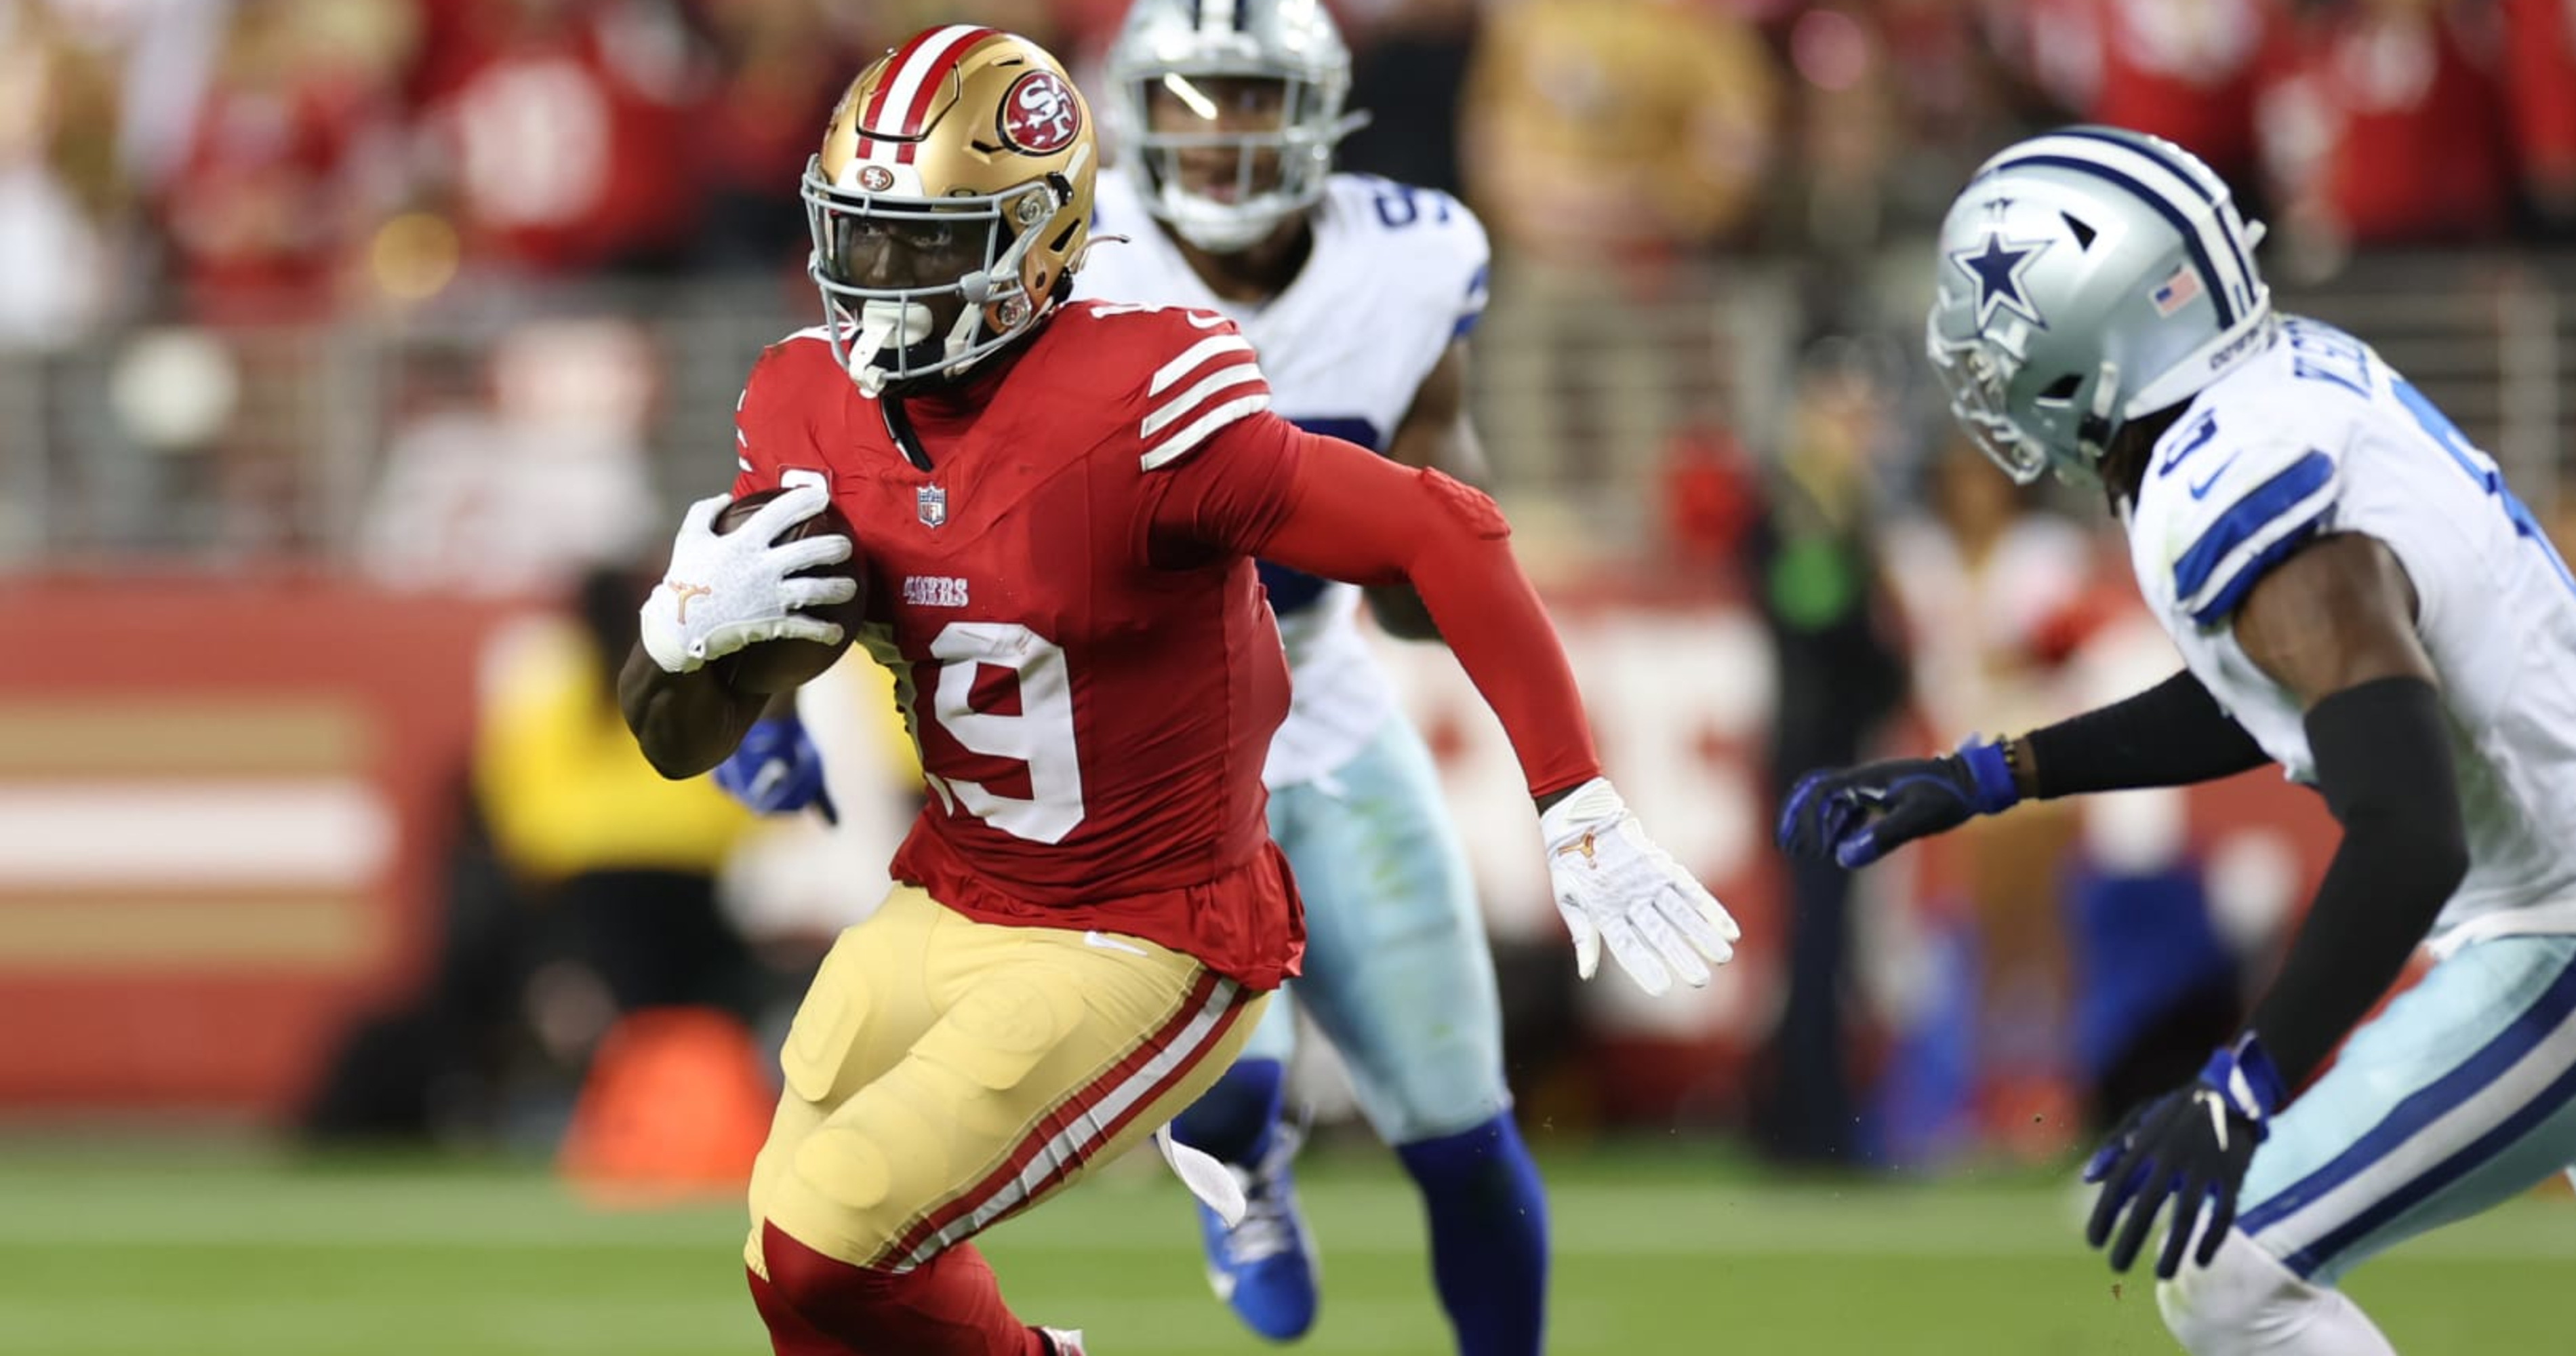 49ers 23 - 17 Cowboys summary: score, stats and highlights